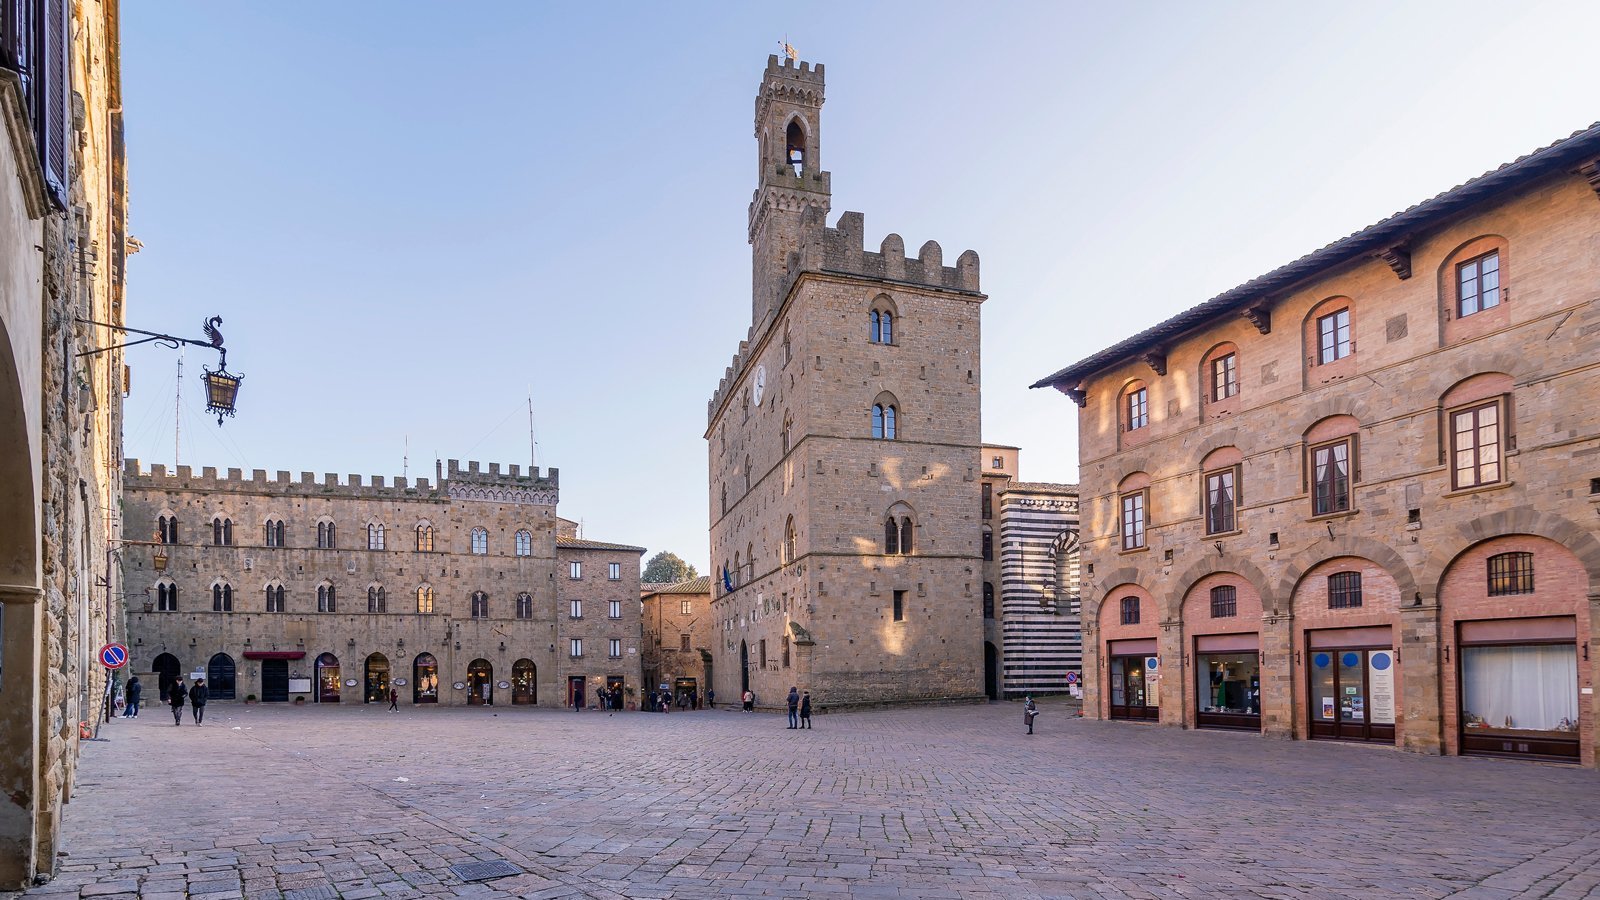 Volterra, a quiet centre renowned for its Etruscan heritage